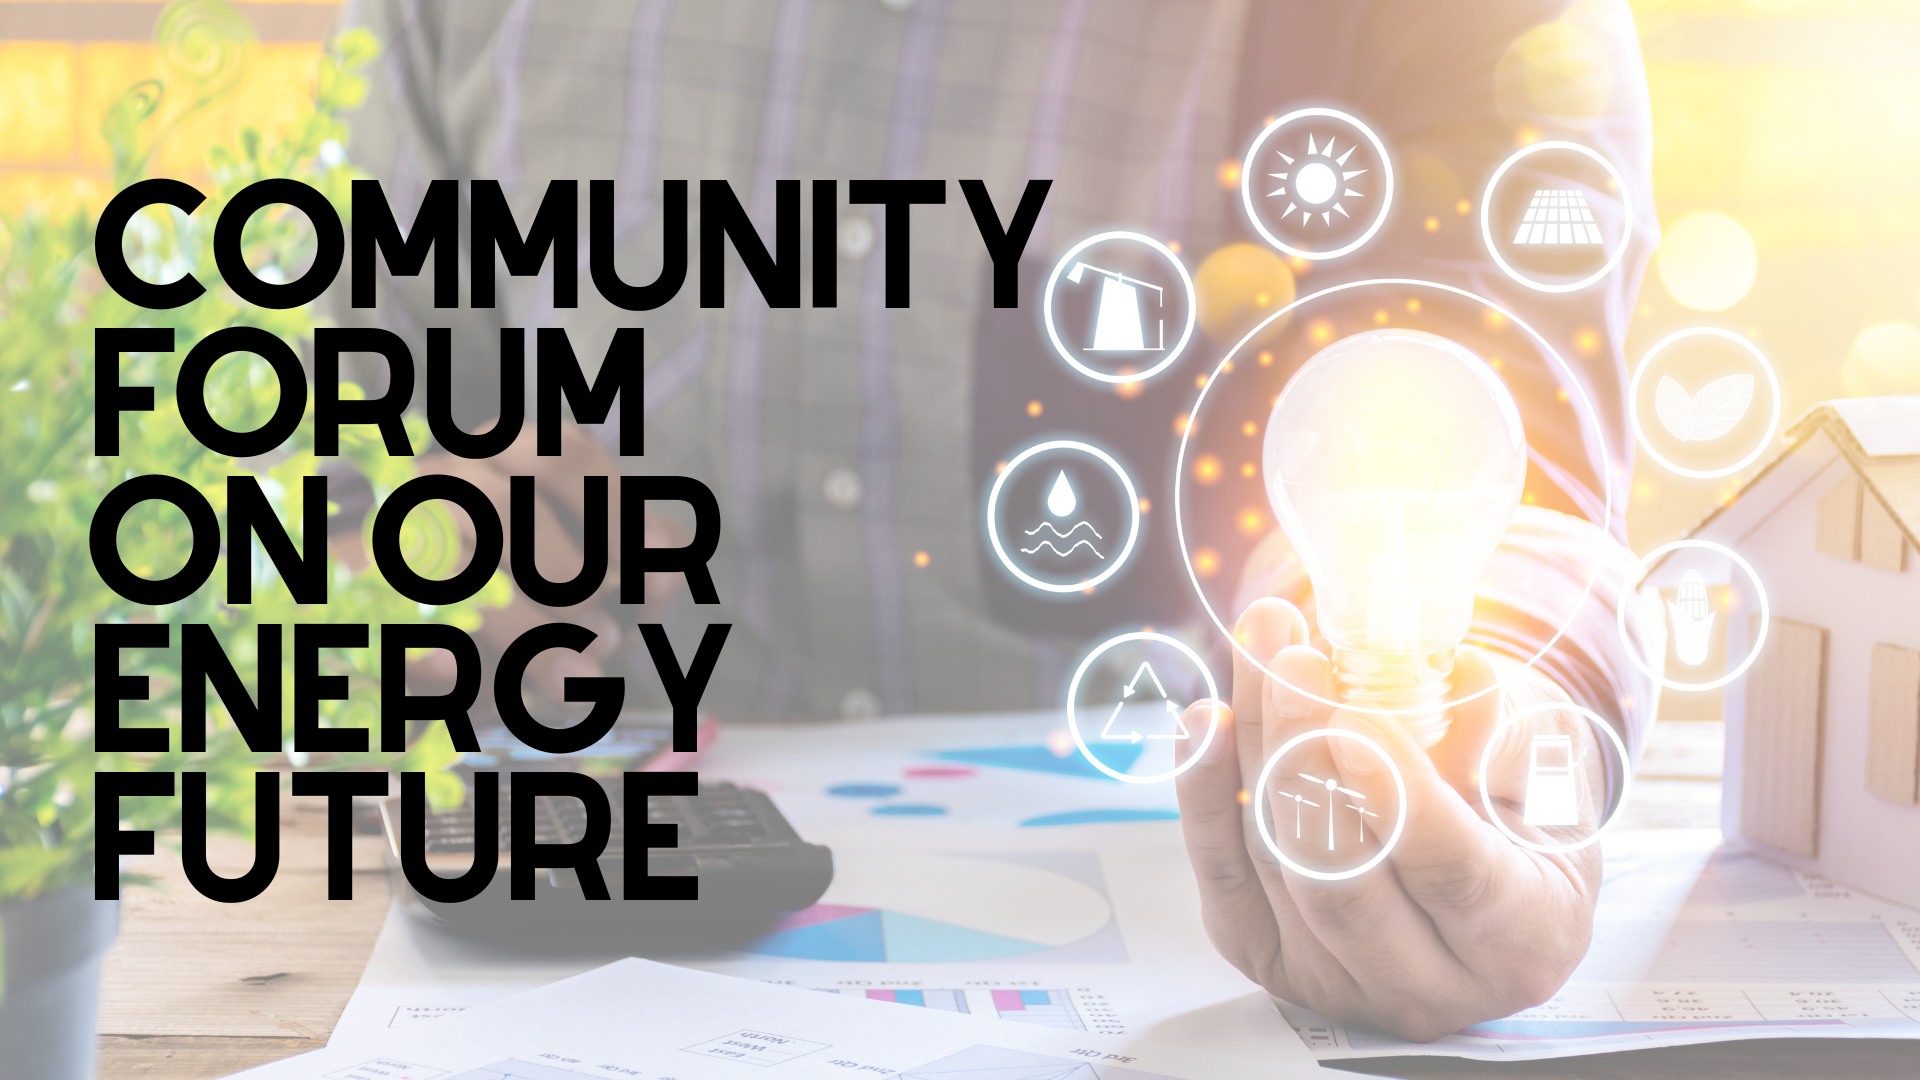 Community Forum on our Energy Future